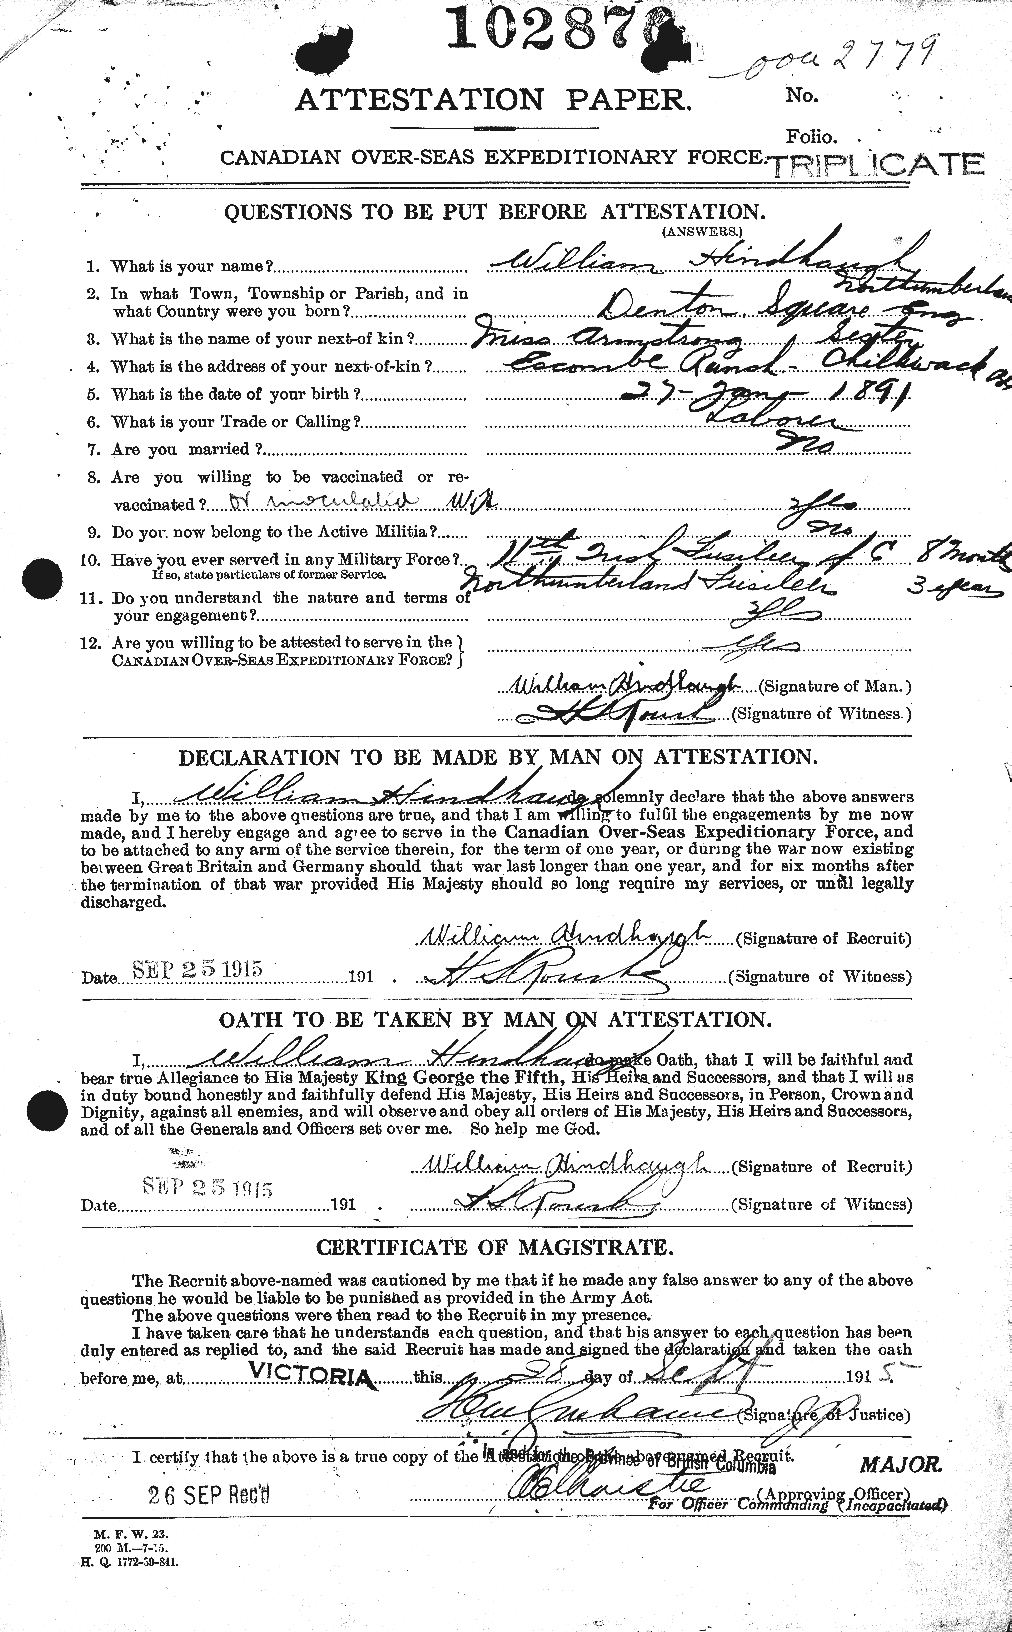 Personnel Records of the First World War - CEF 394314a